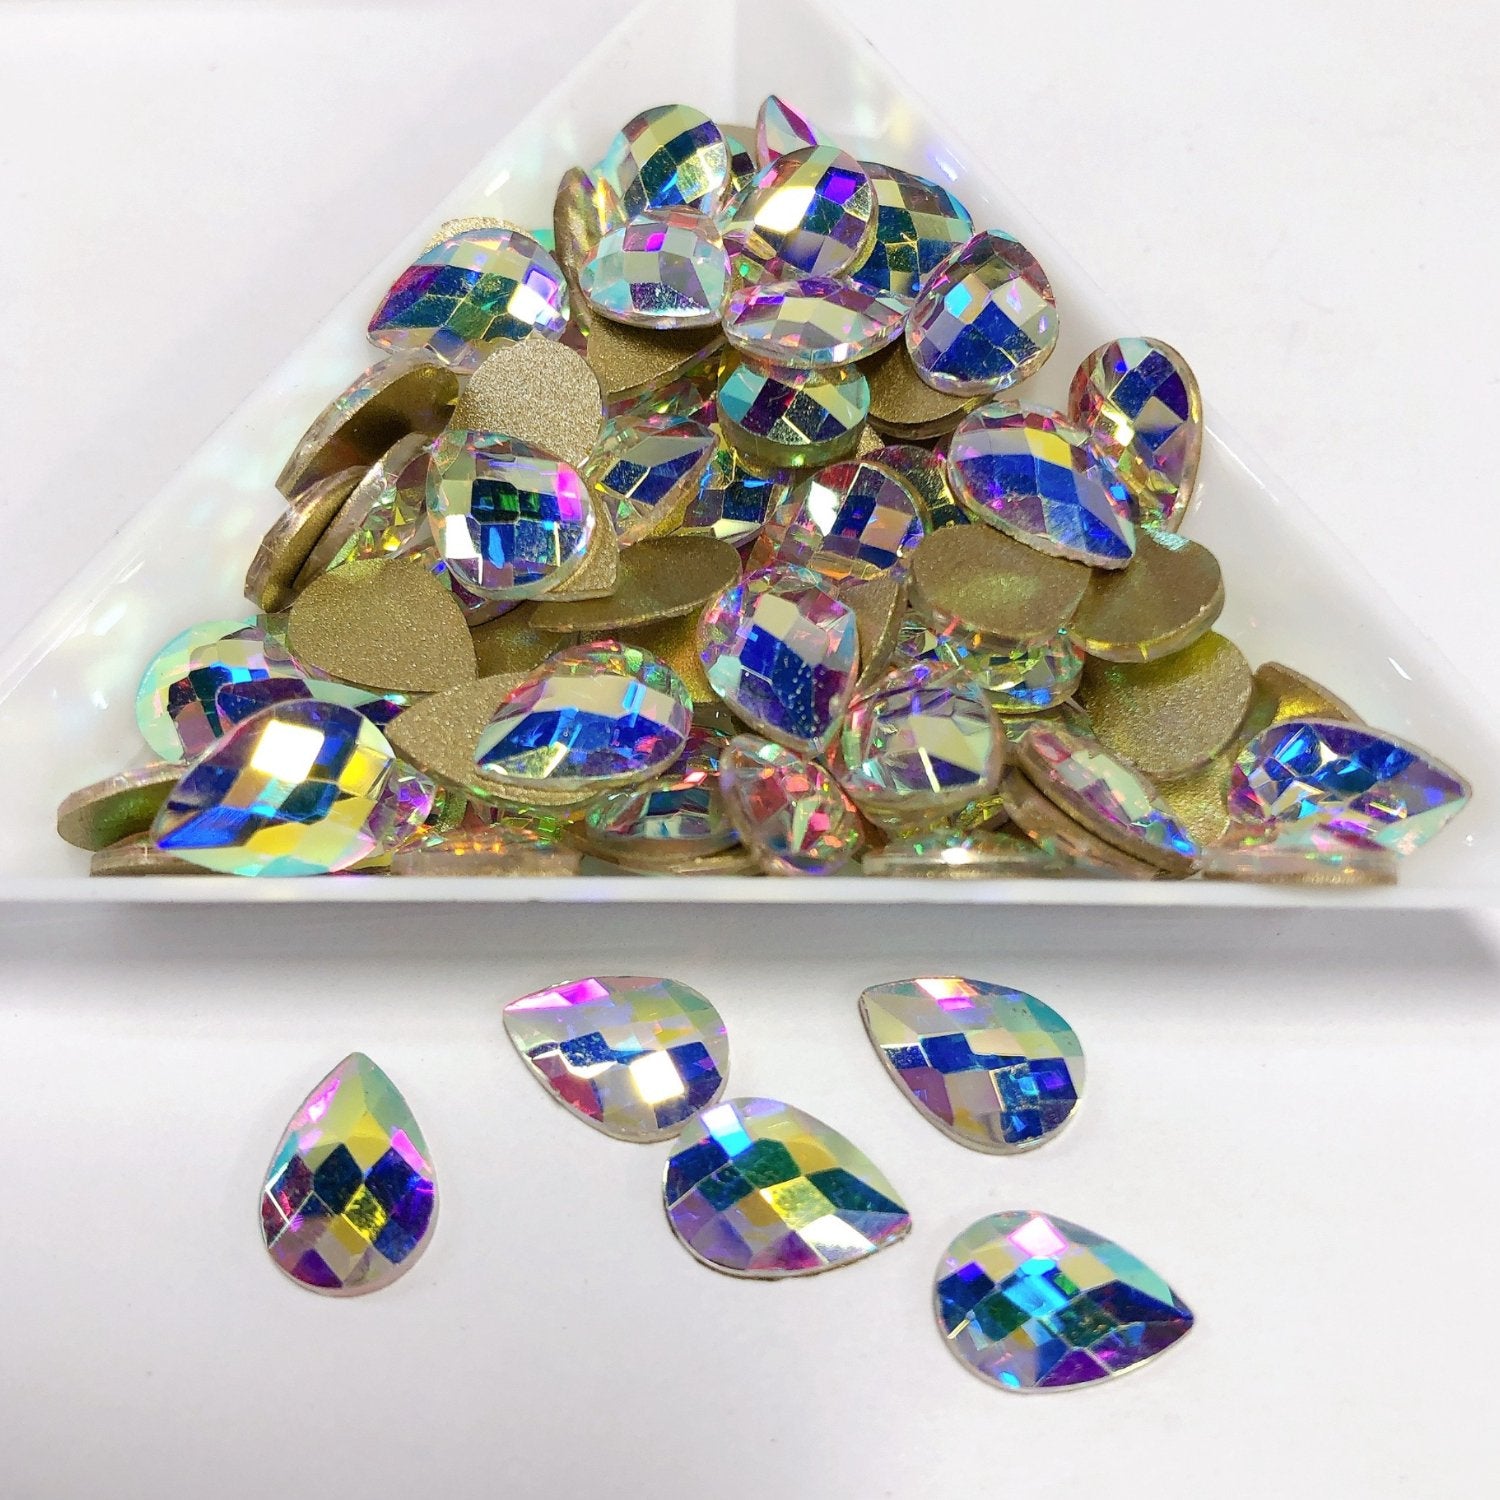 Pear Shape Rhinestones AB Colors Fancy Shapes made of glass,